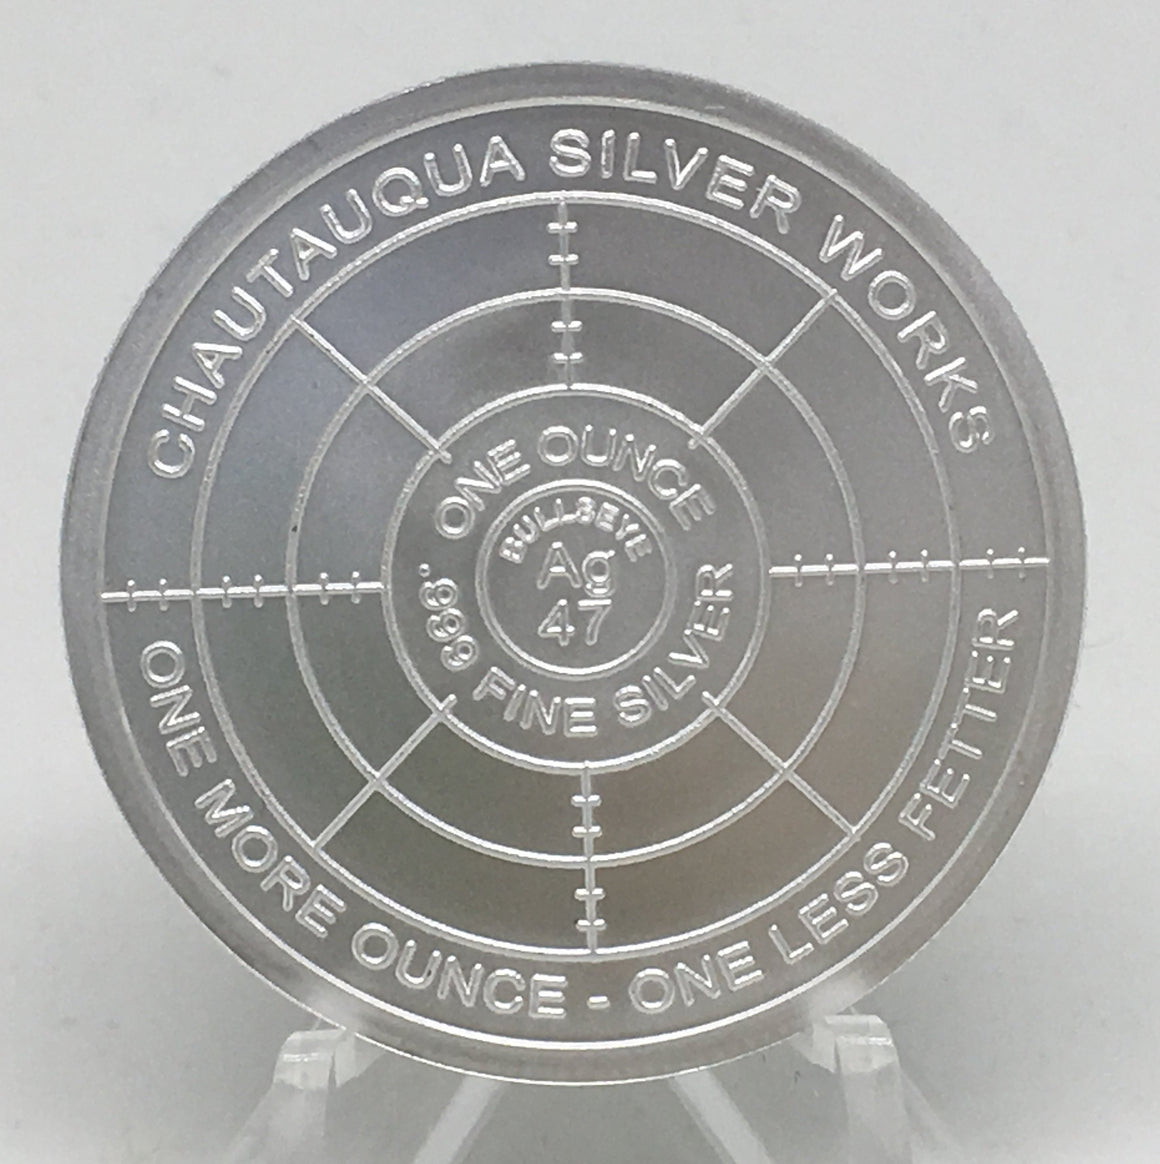 Toxic Series Too #5 The Peddler, BU Finish by Chautauqua Silver Works, 1oz .999 Silver Round.